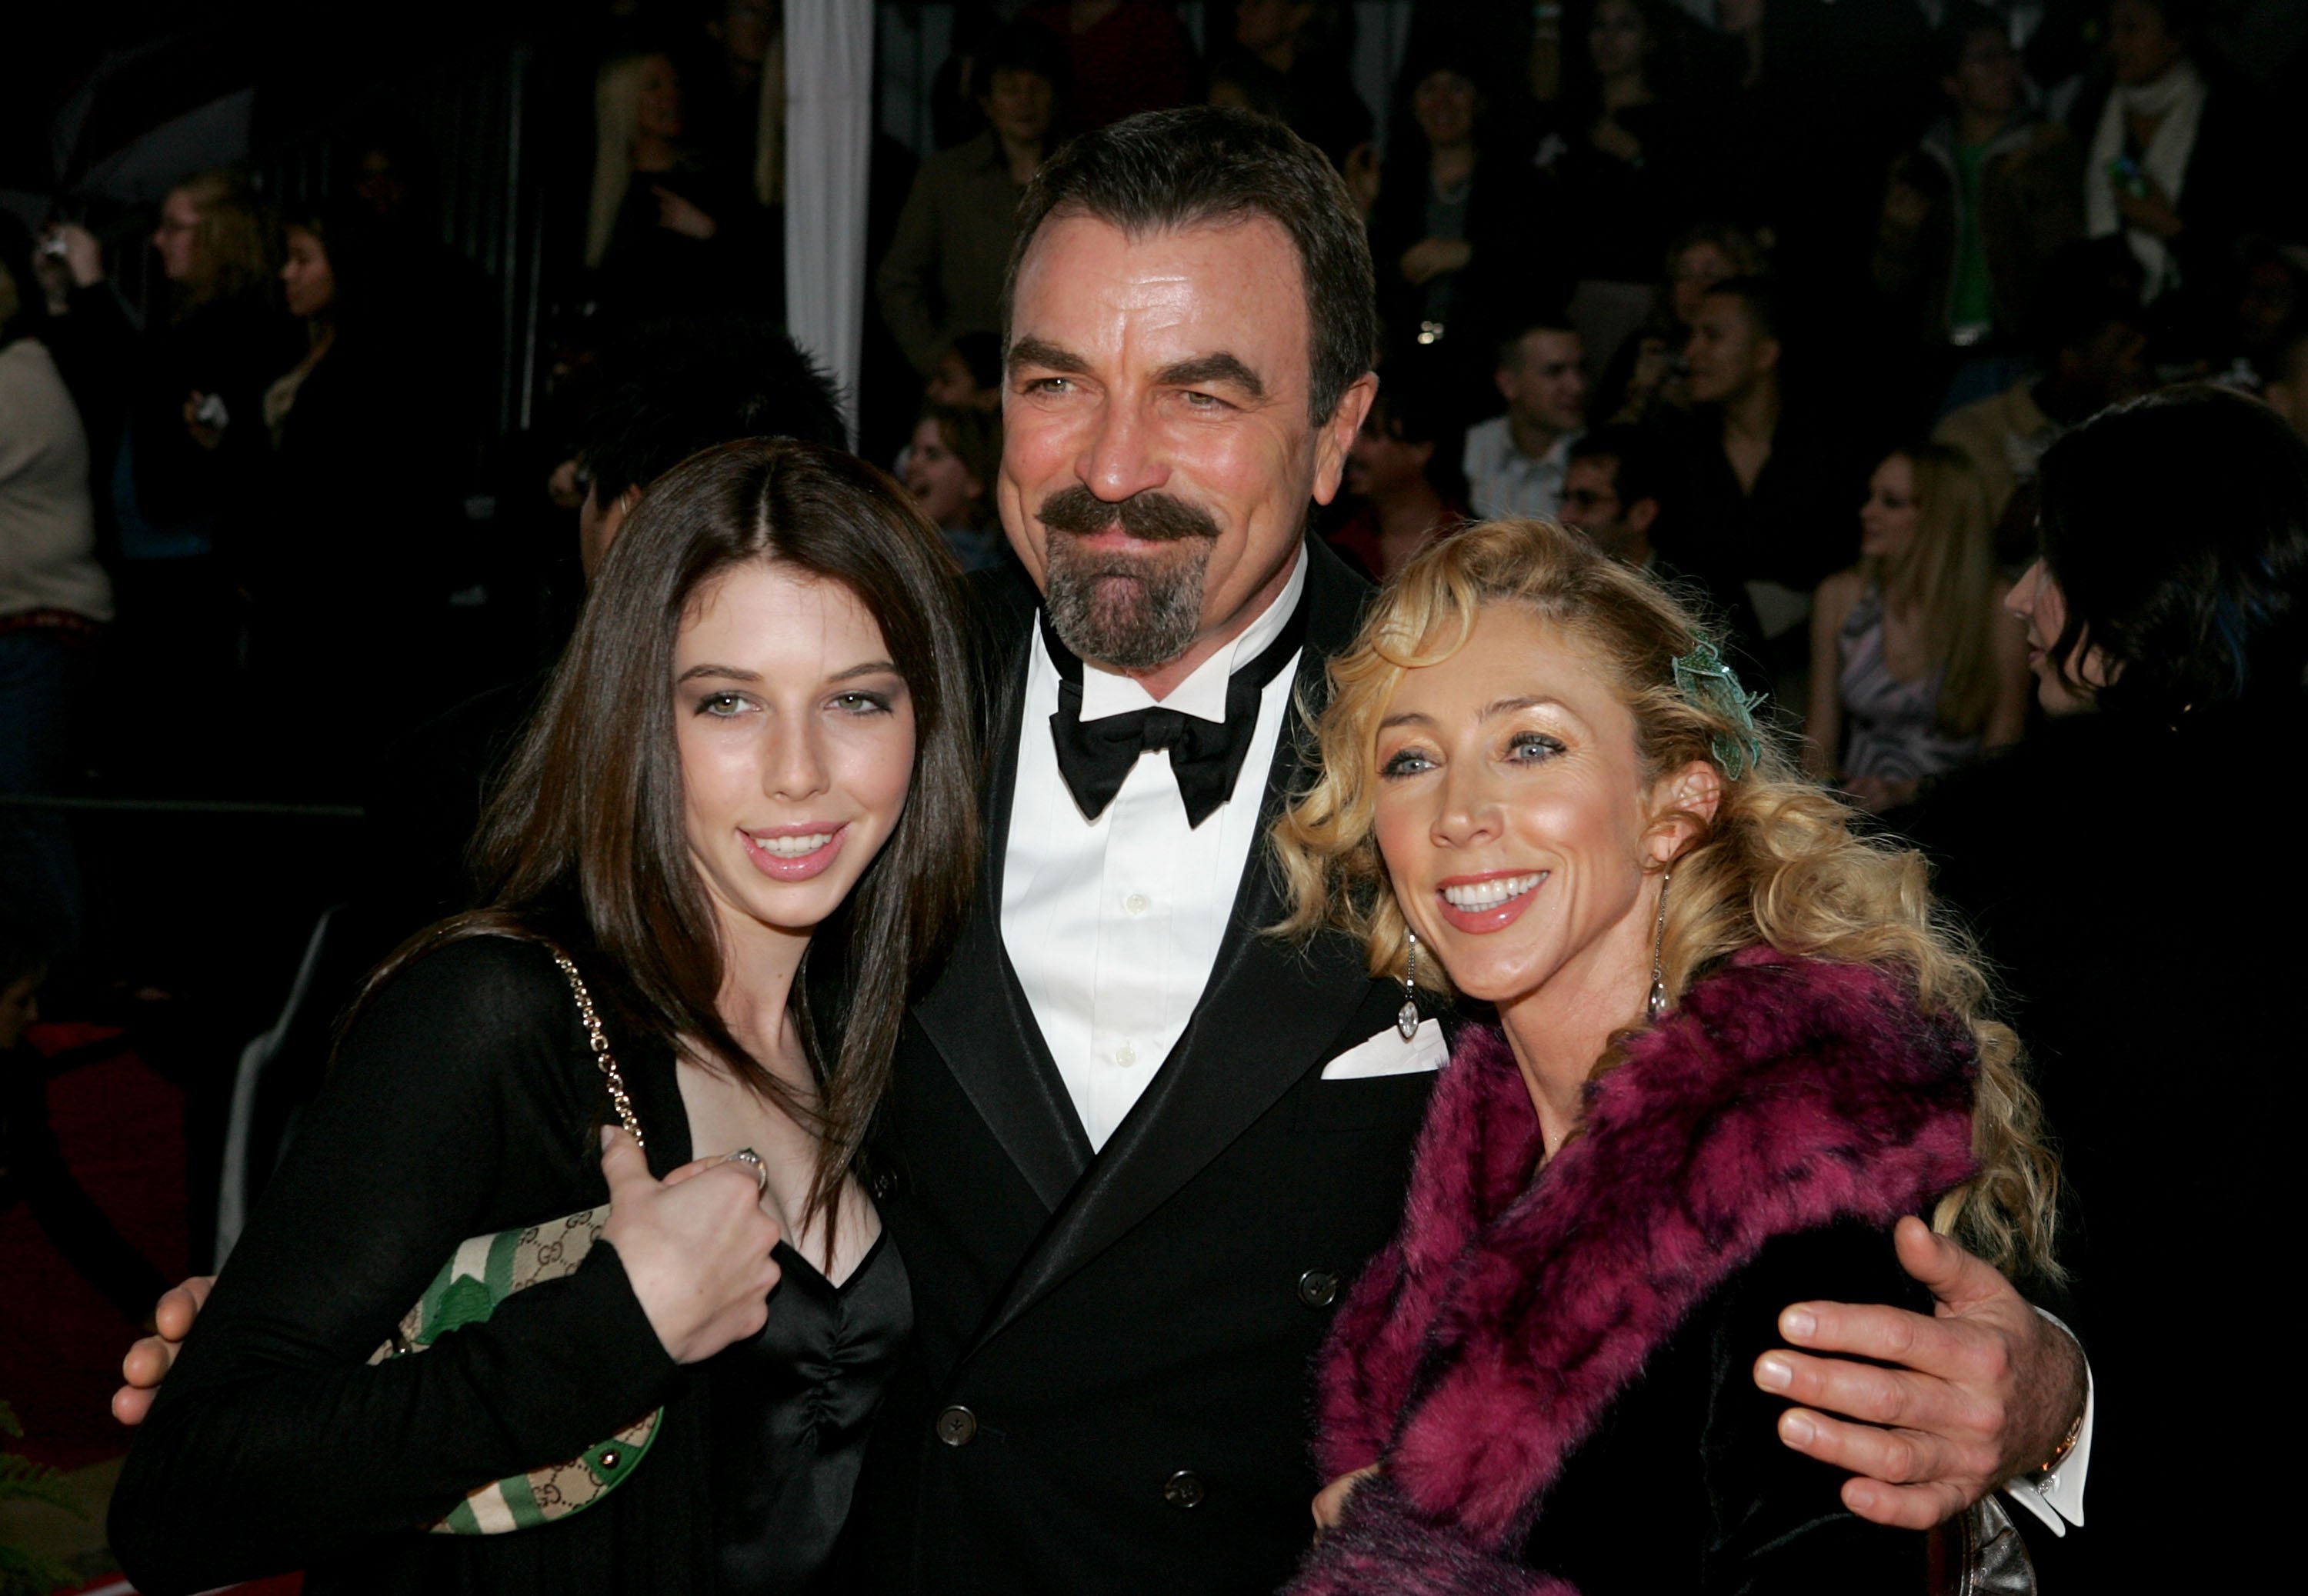 An undated image of Tom Selleck, daughter Hannah and wife Jillie Mack arriving at the 31st Annual People's Choice Awards | Photo